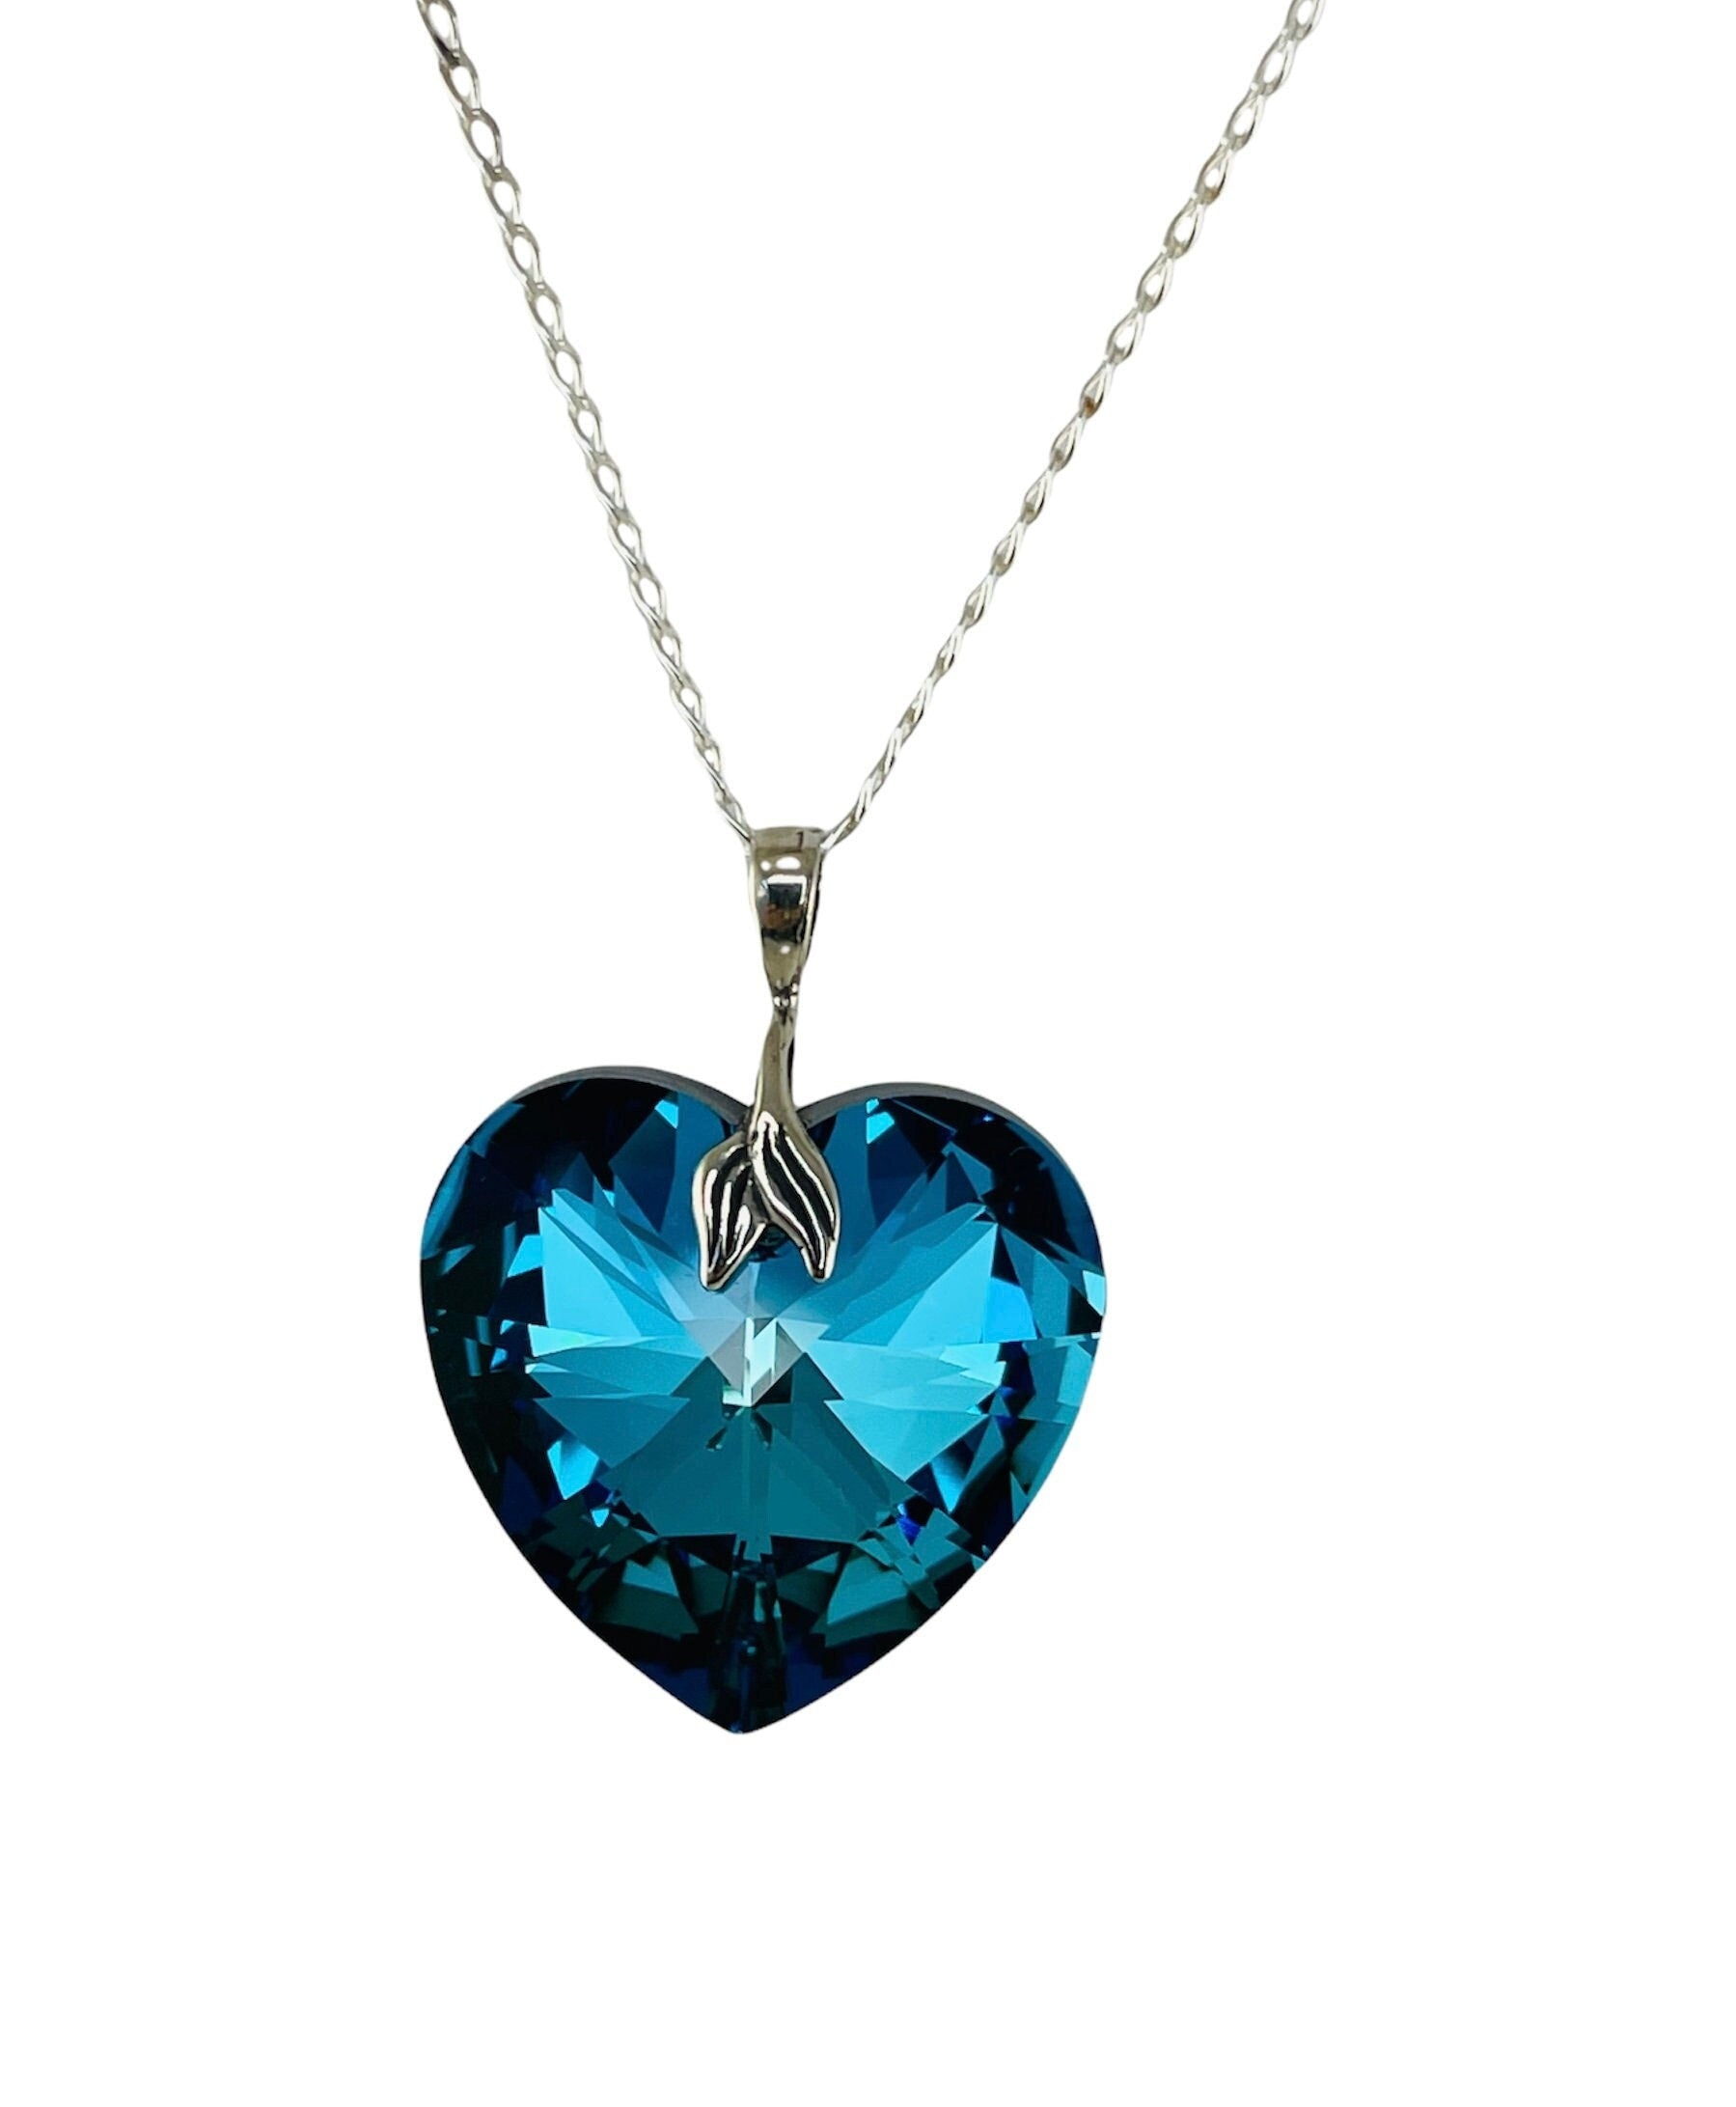 Personalized Engraved Crystal Heart Necklace | Buy Now!